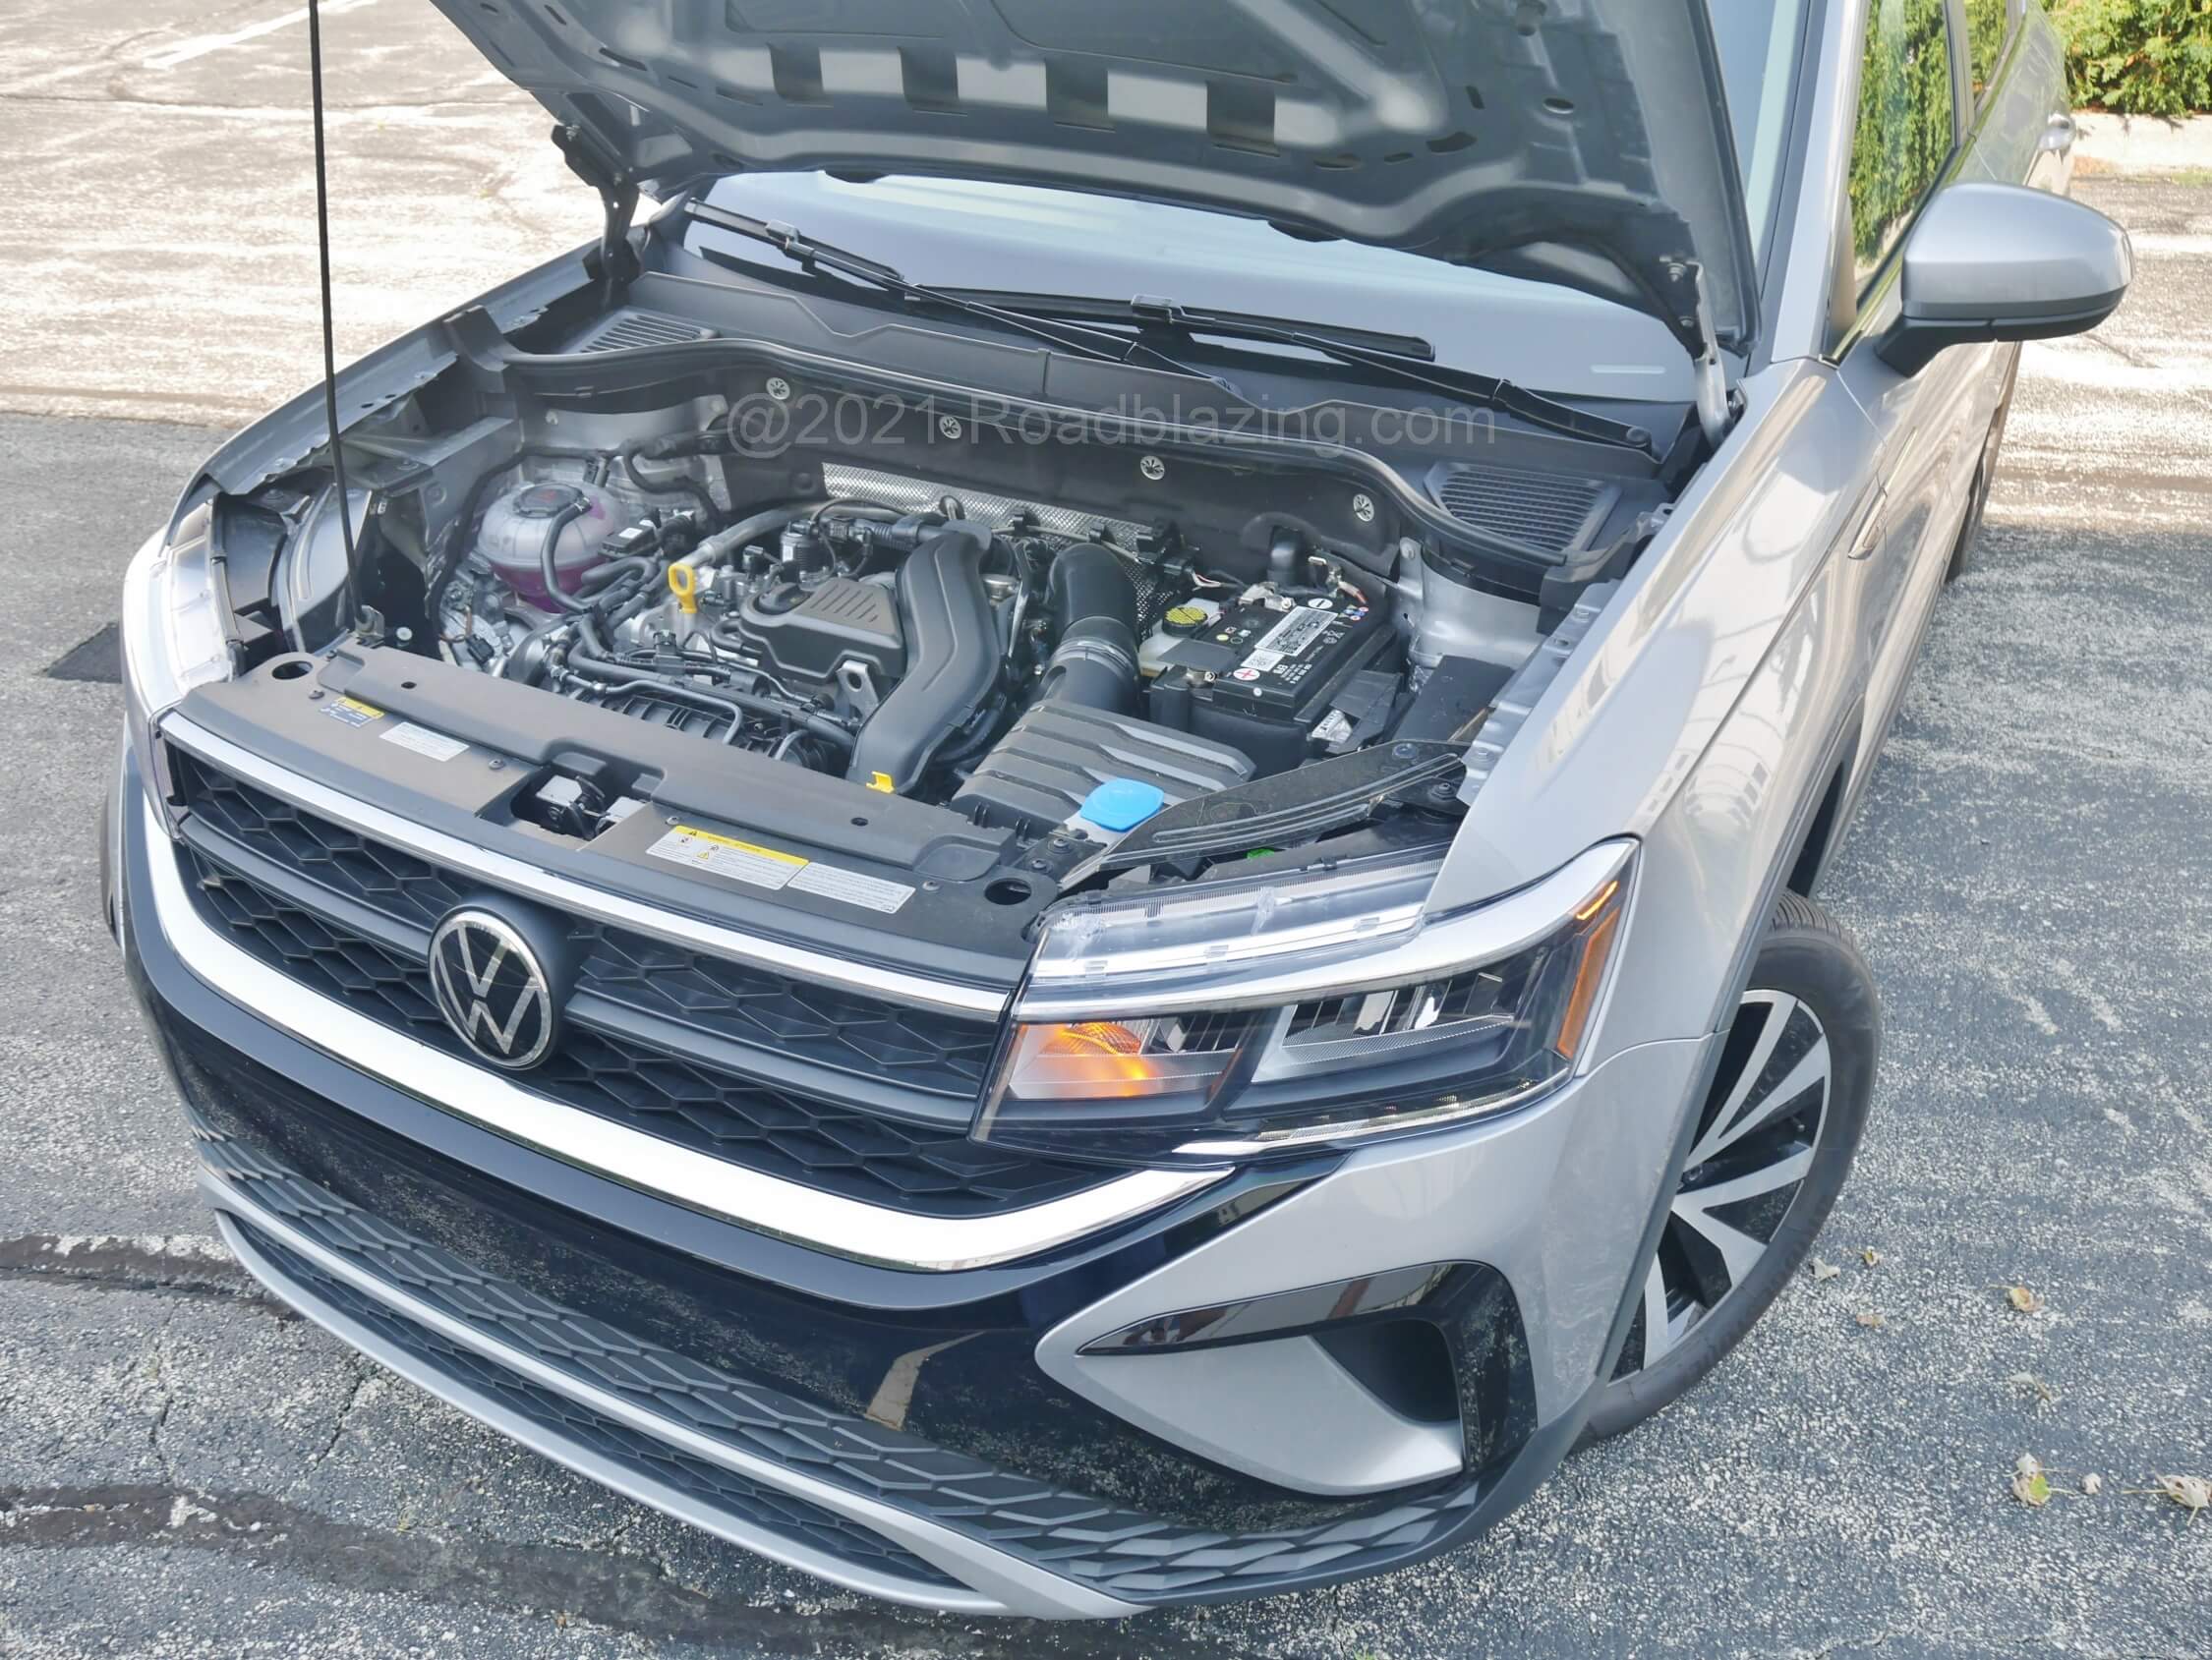 2022 Volkswagen Taos SE 4Motion: 100 cc > than Jetta's EA211 this gas I-4 = 158 hp + 184 lb-ft mated to a 7-speed DCT for 29 mpg